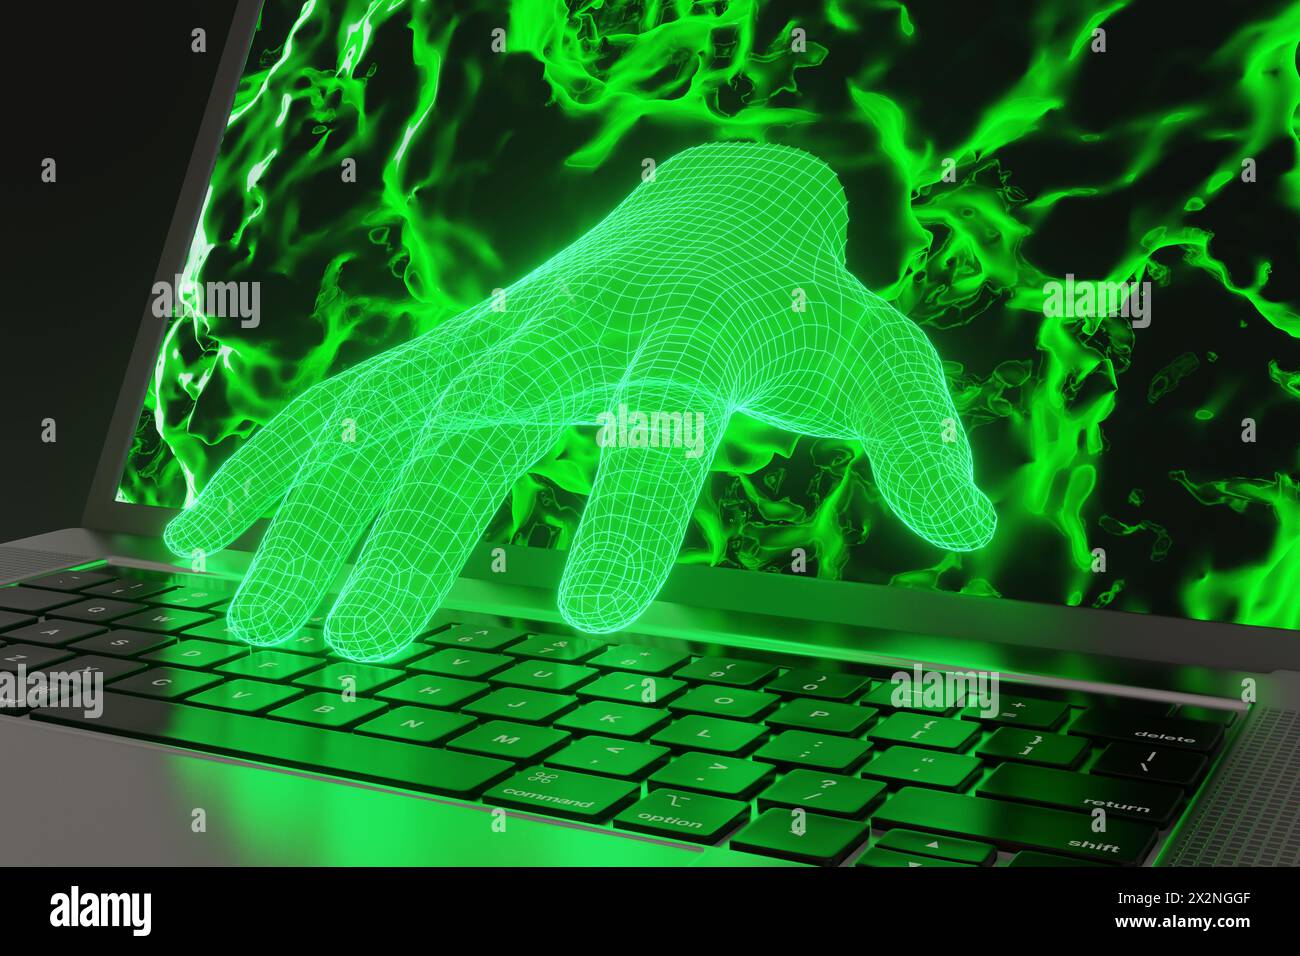 Glowing meshed green human hand extending from a black laptop screen to the keyboard with abstract background. Internet security and online scams Stock Photo